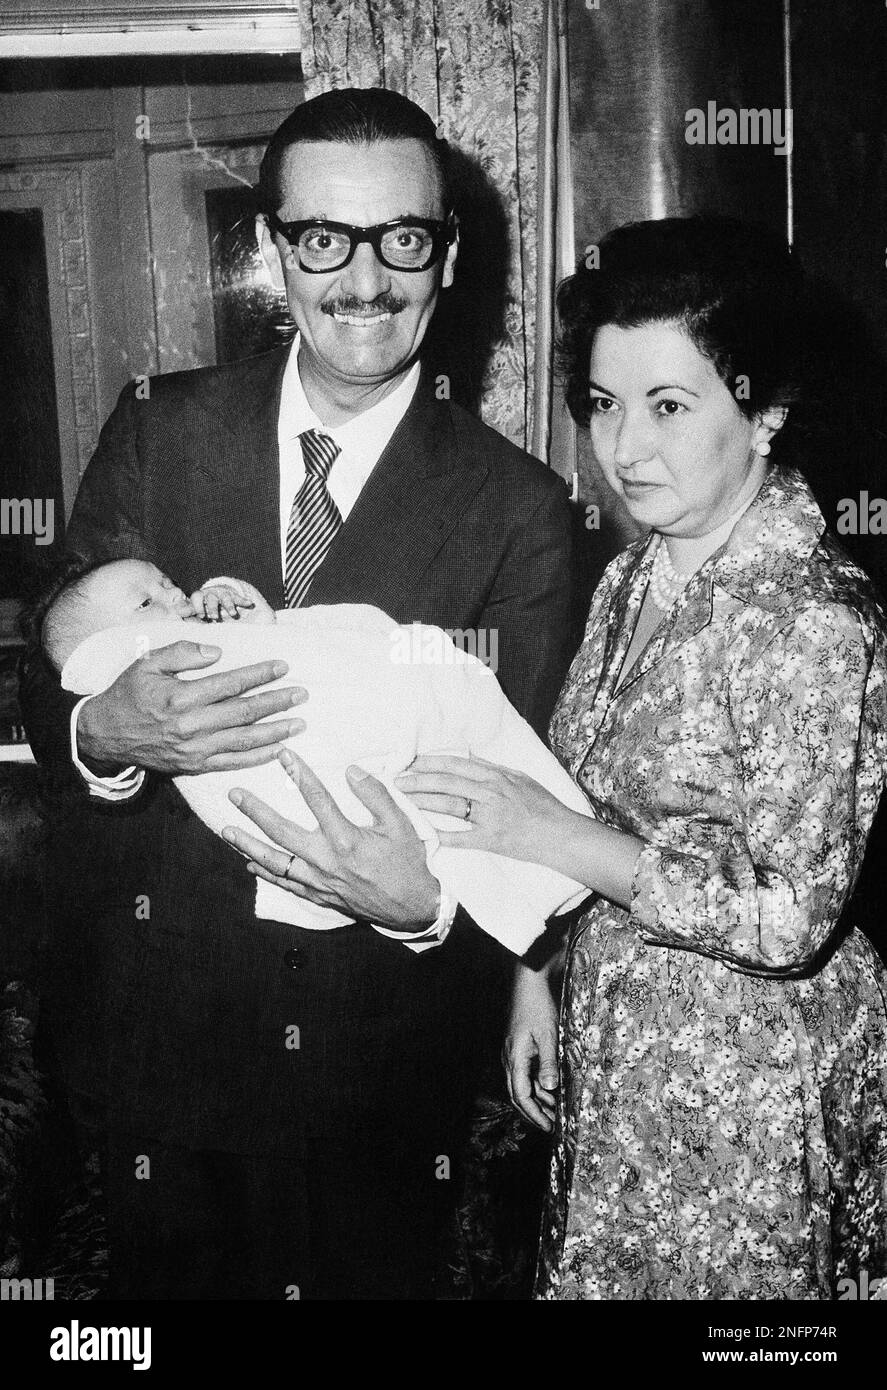 Joao Goulart who resigned the presidency of Brazil, and his wife pose with their grandchild on Sept. 9, 1961in England aboard the ship Uruguay Star before sailing from Lisbon. Members of his immediate family are accompanying him. (AP Photo) Stock Photo